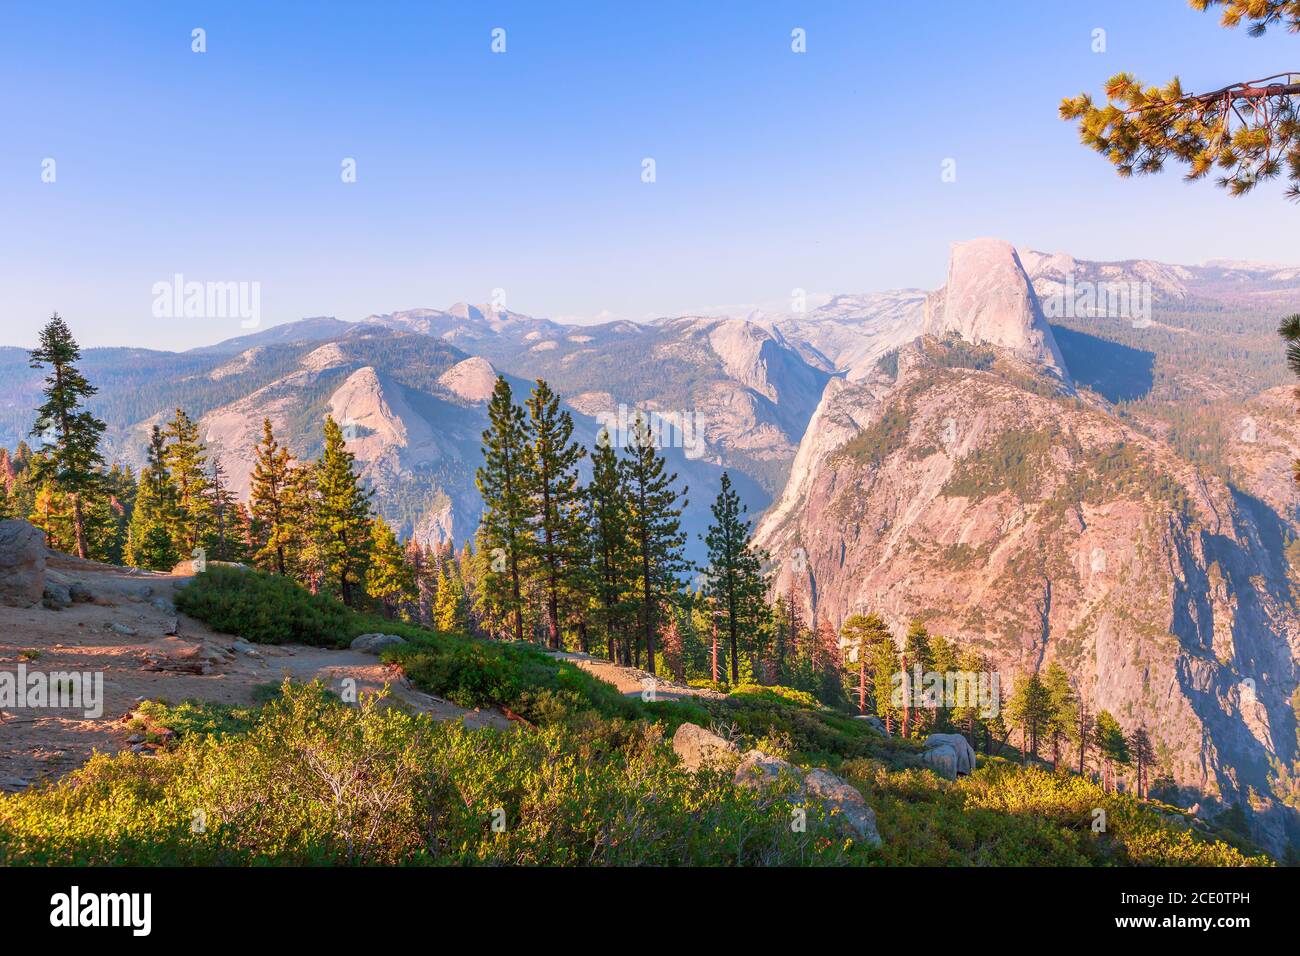 The aerial panorama of Washburn Point in Yosemite National Park, California, United States. View from Washburn Point: Half Dome, Liberty Cap, Yosemite Stock Photo